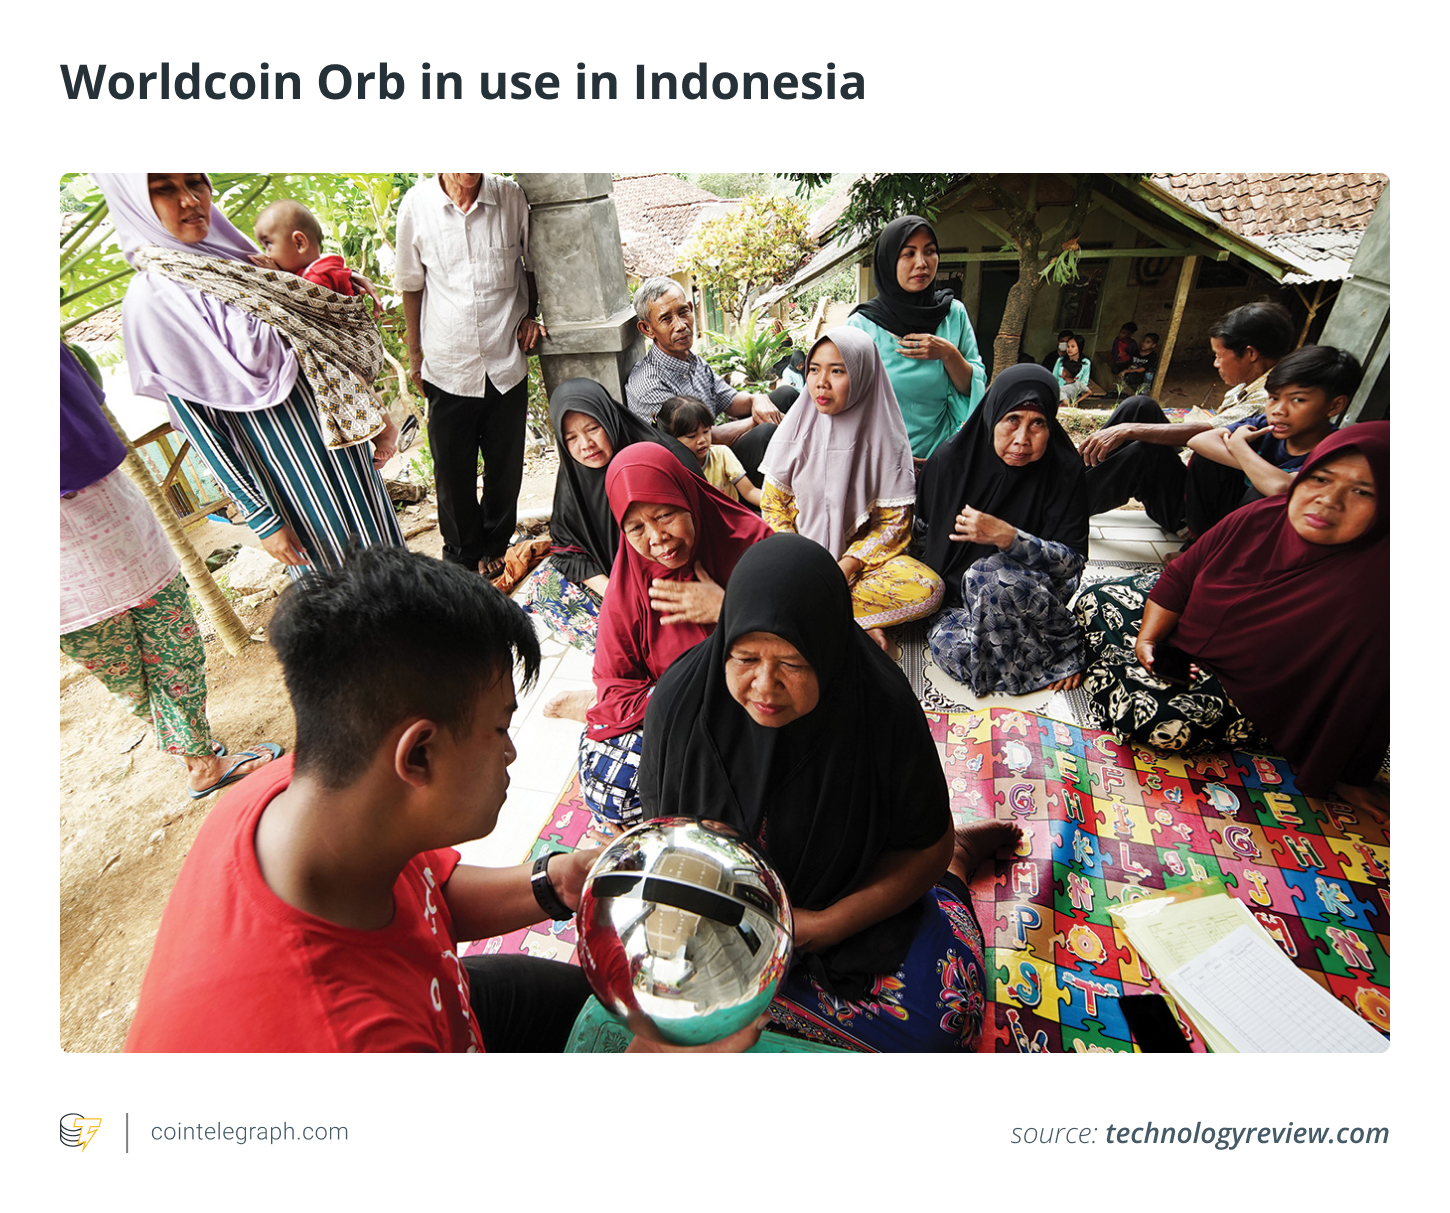 Worldcoin Orb in use in Indonesia